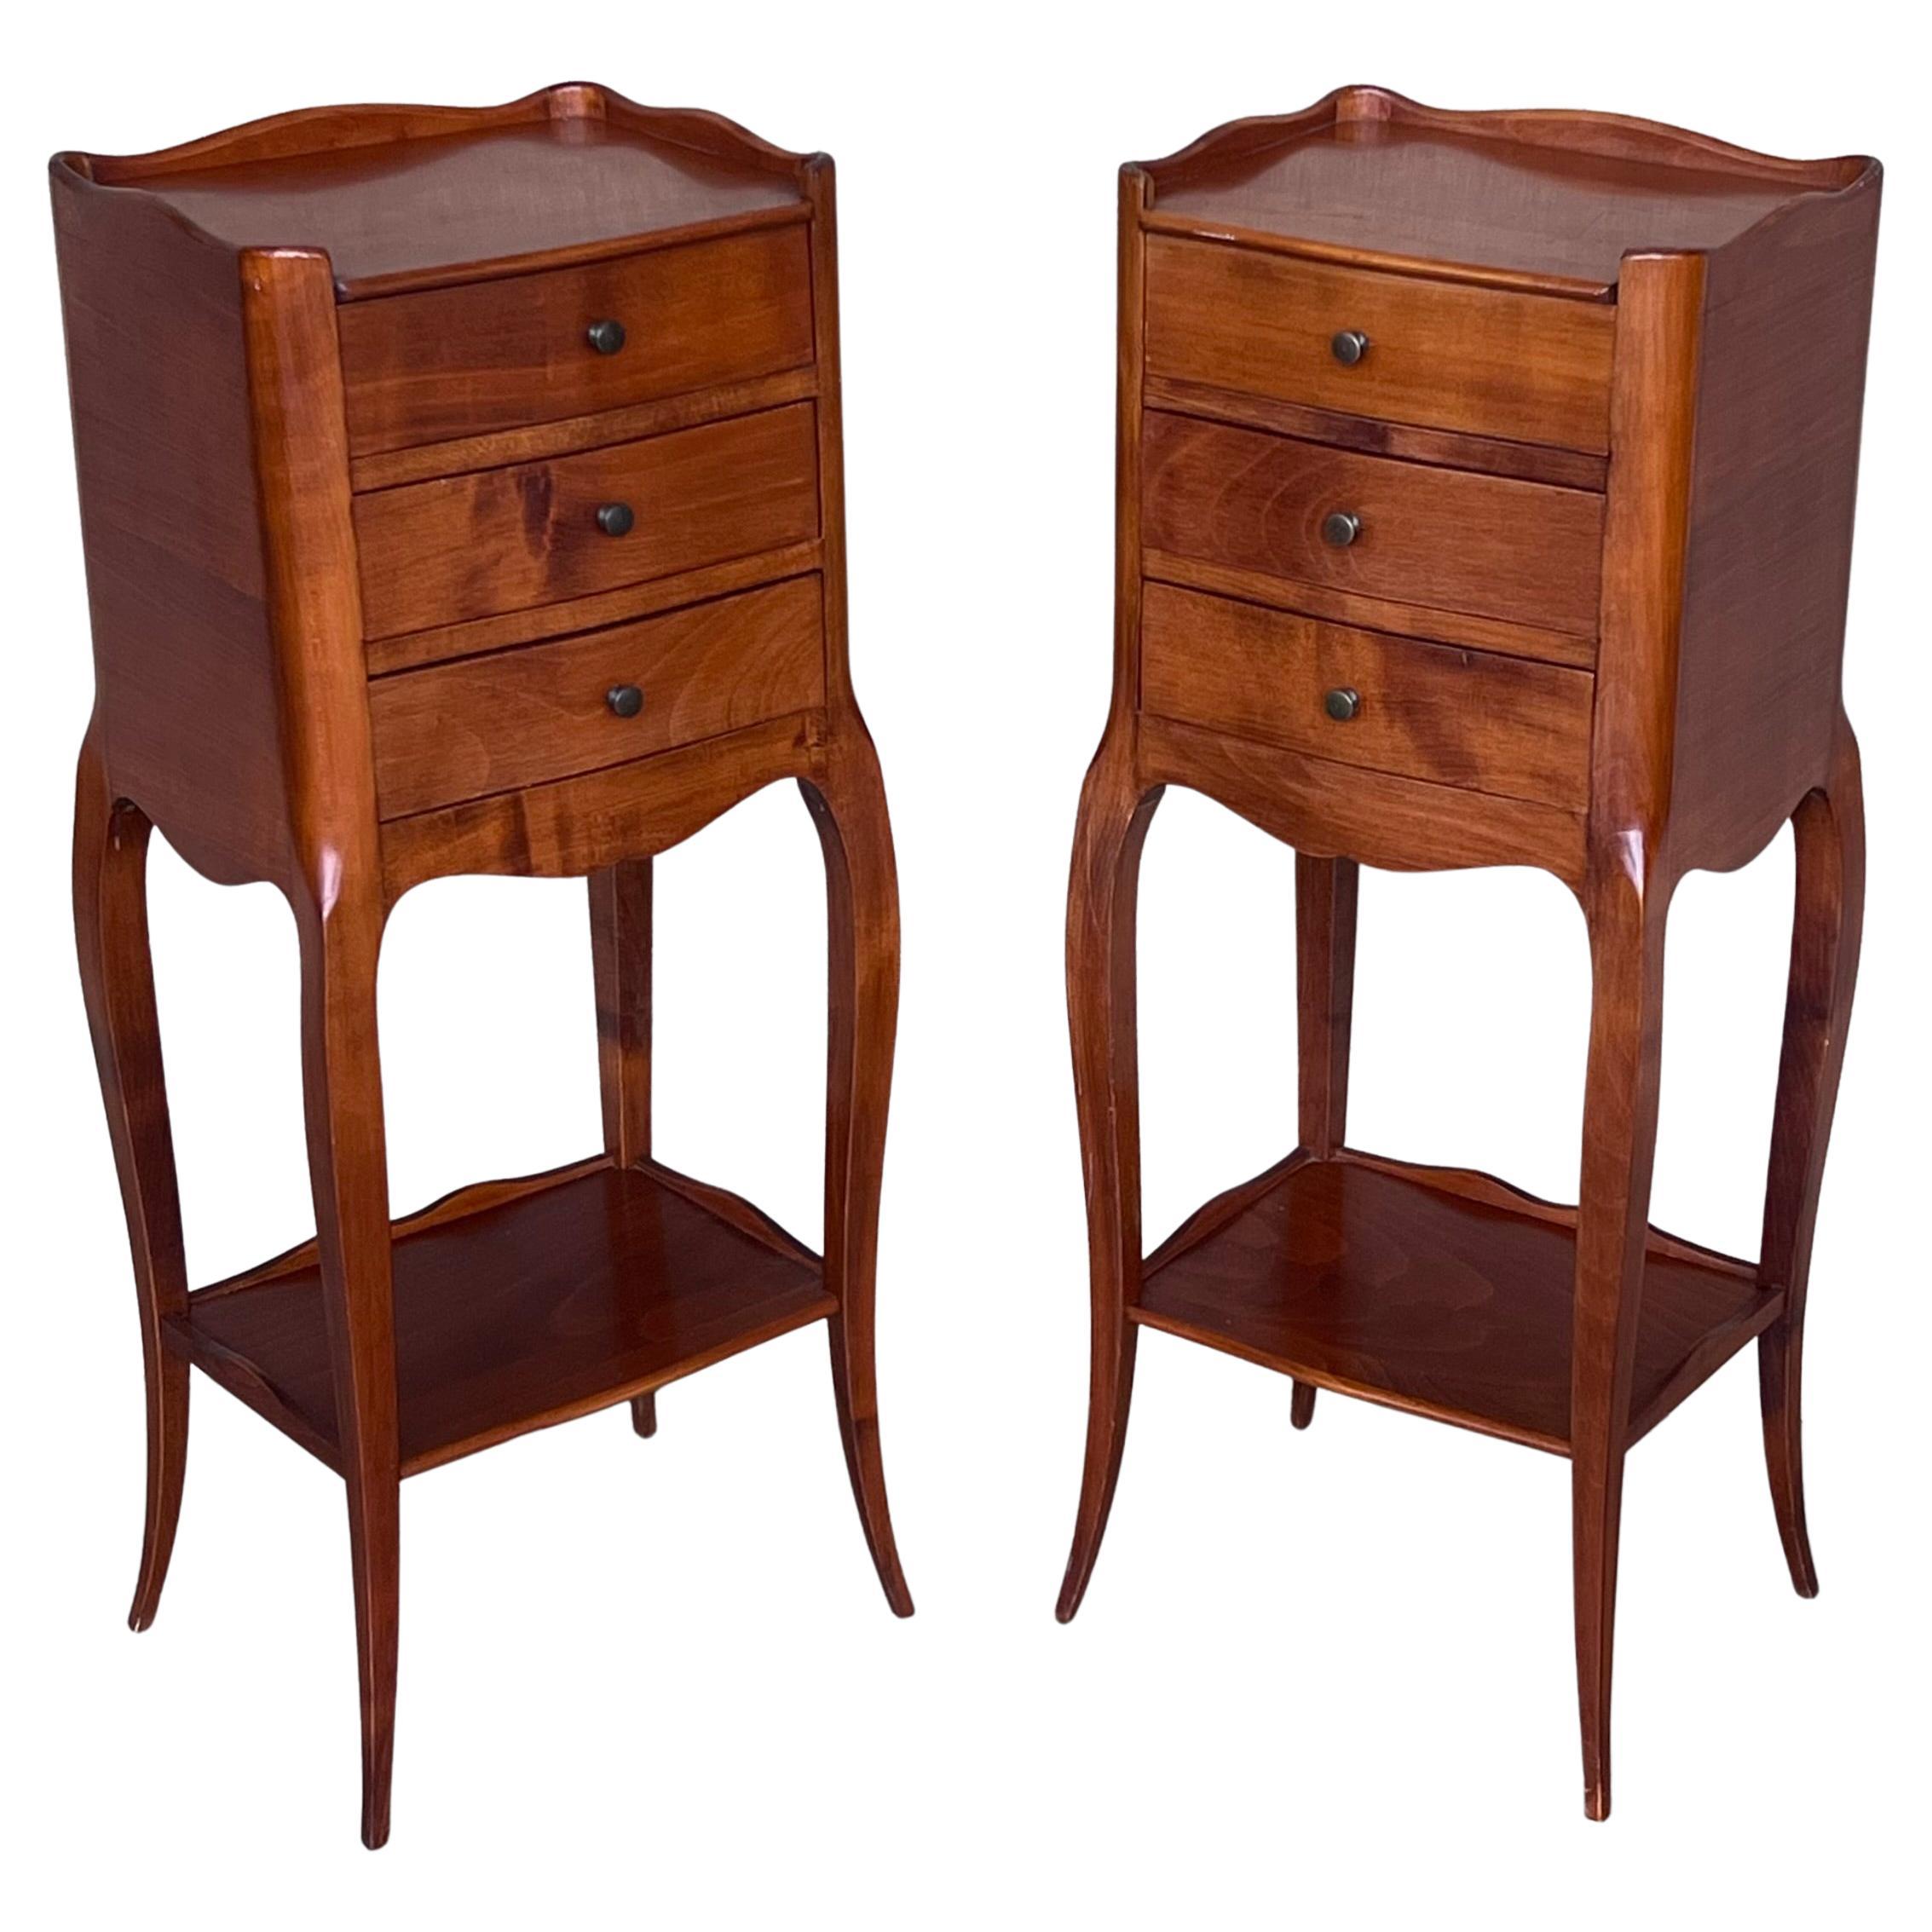 Pair of French Walnut Narrow Bedside Tables with Three Drawers For Sale